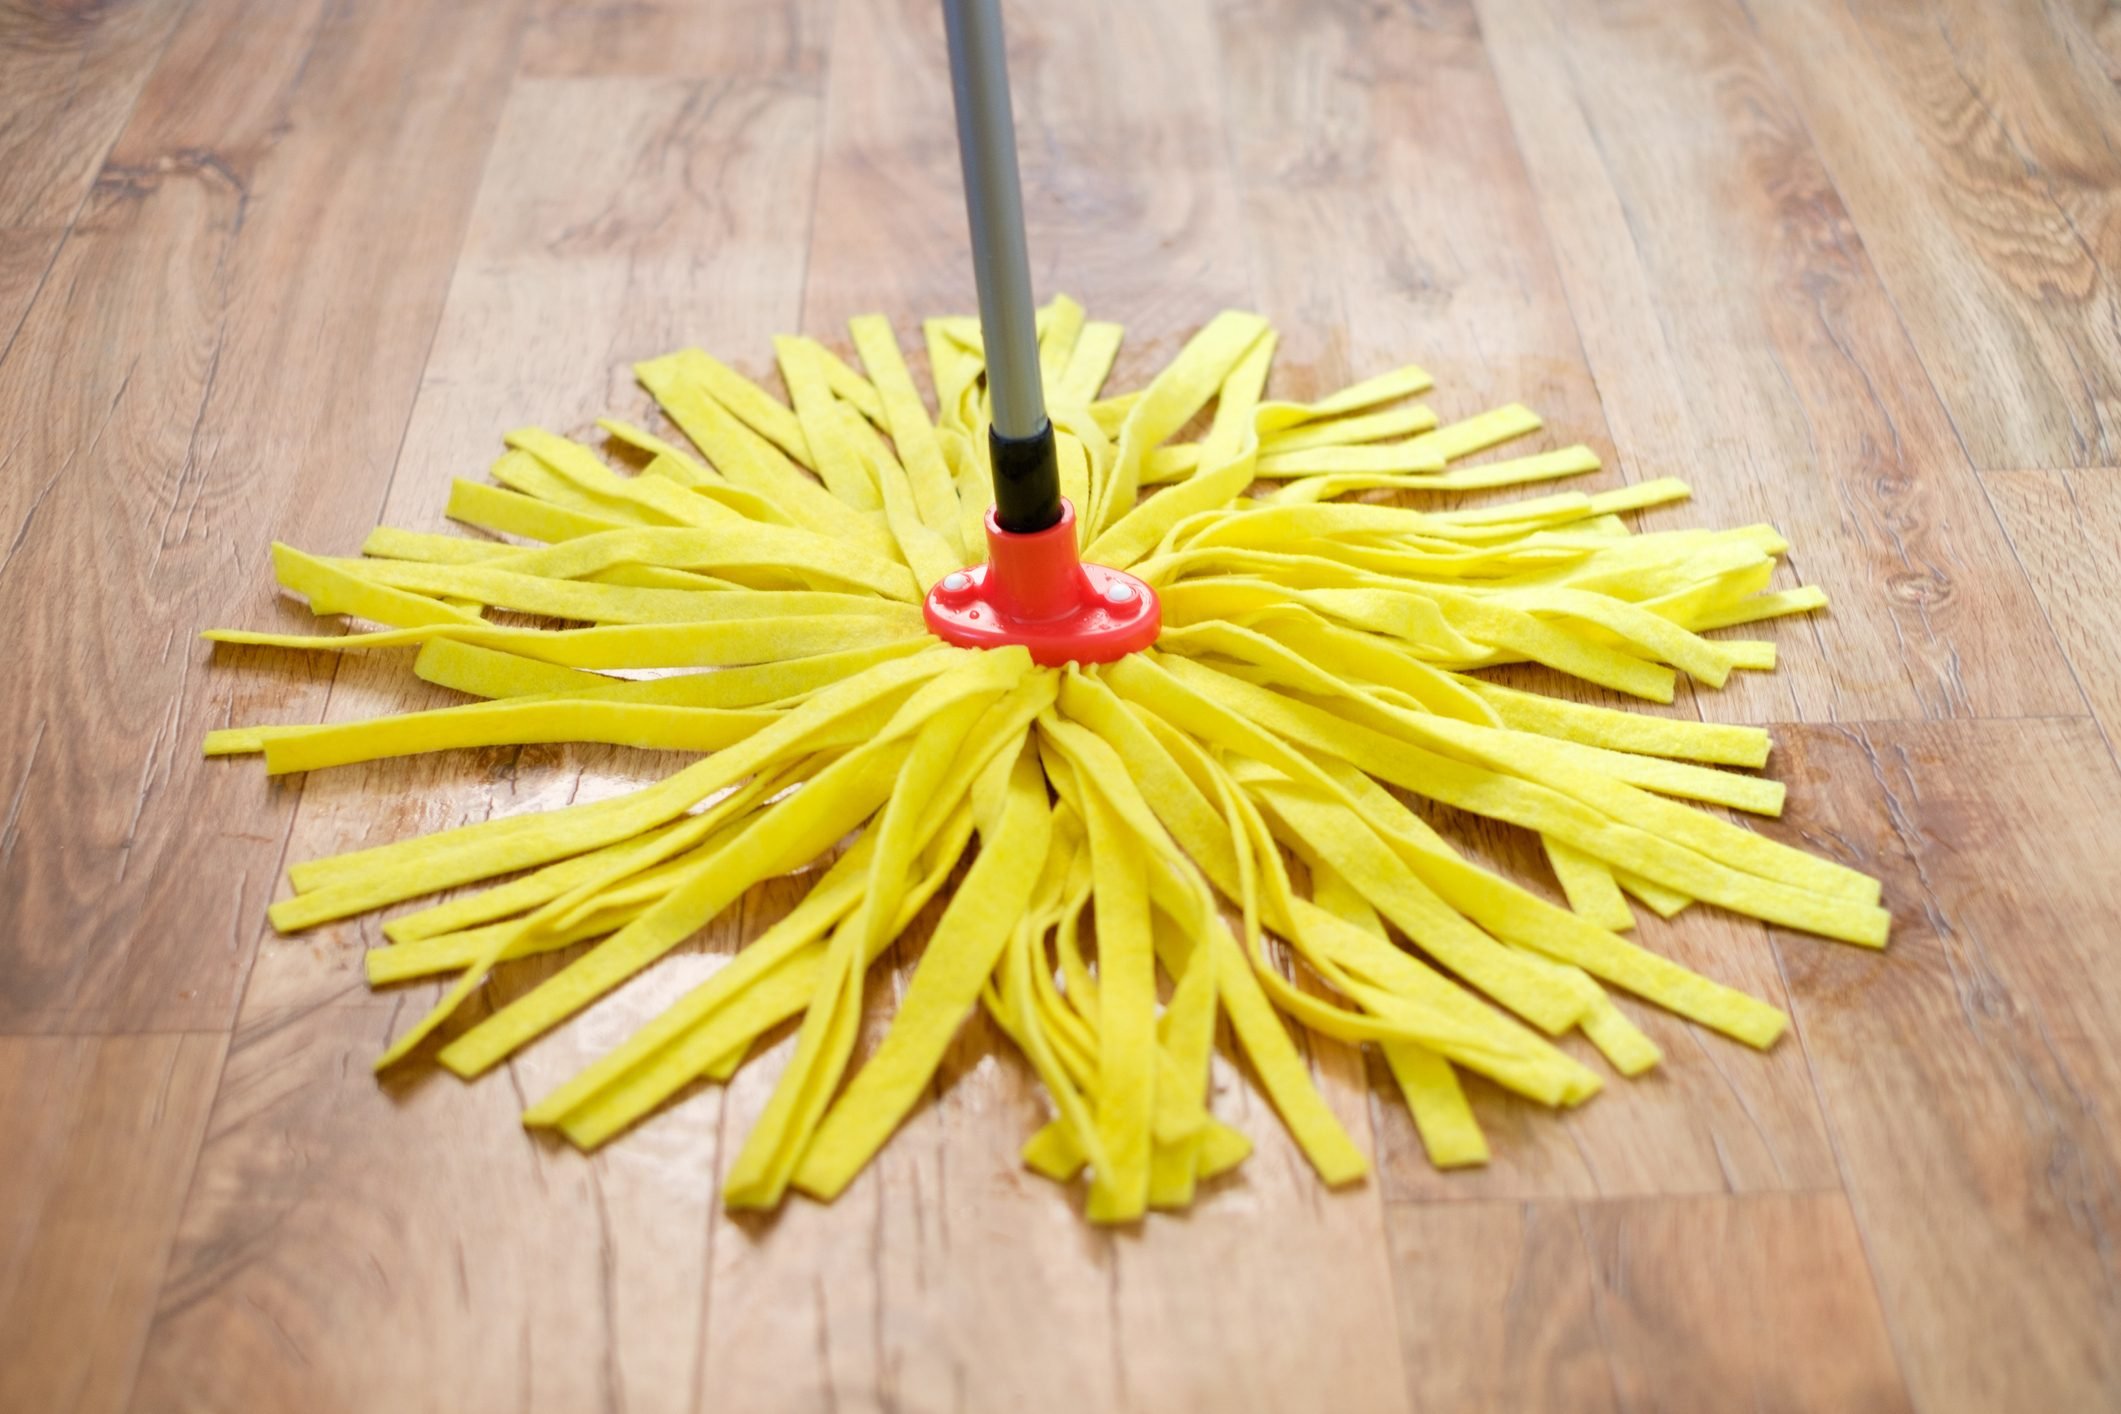 Cleaning tools on parquet floor